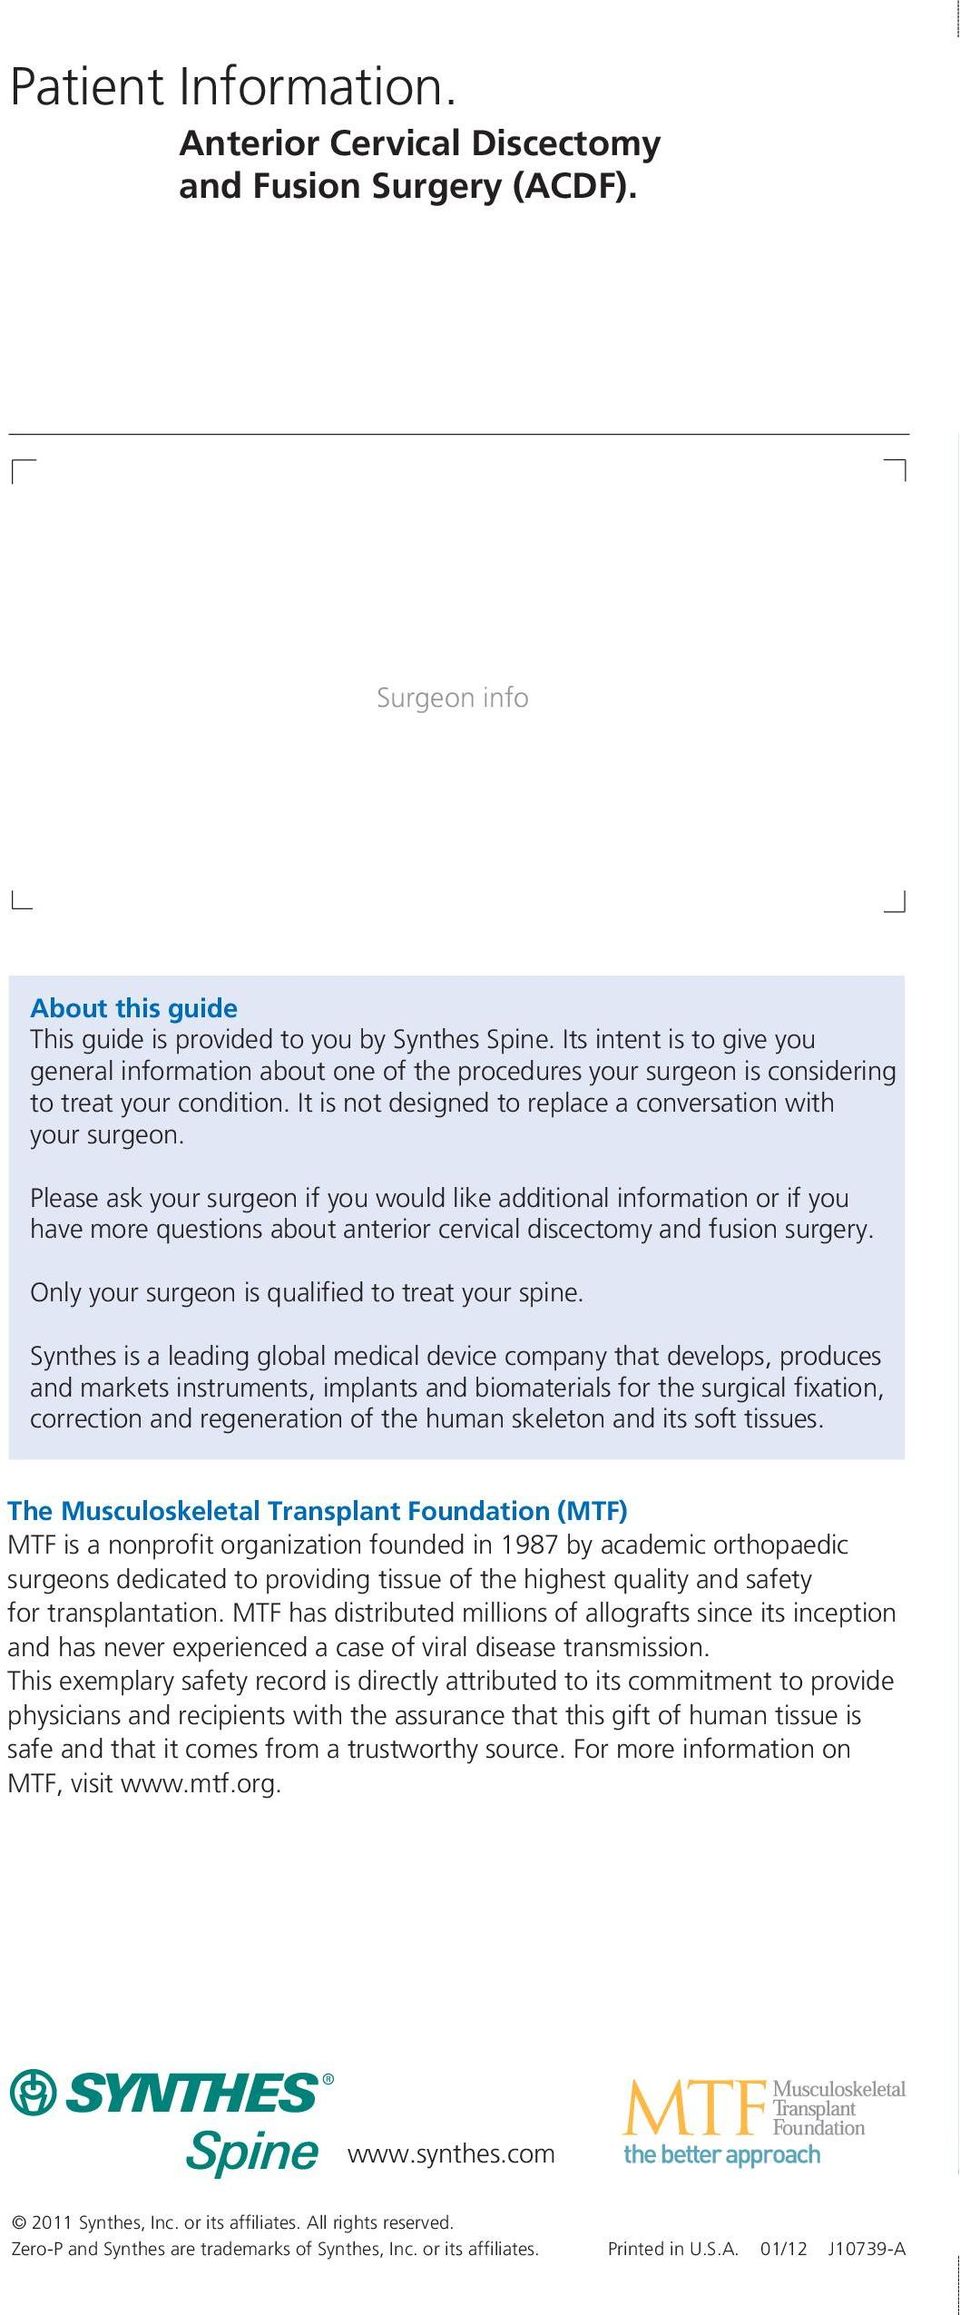 Please ask your surgeon if you would like additional information or if you have more questions about anterior cervical discectomy and fusion surgery.